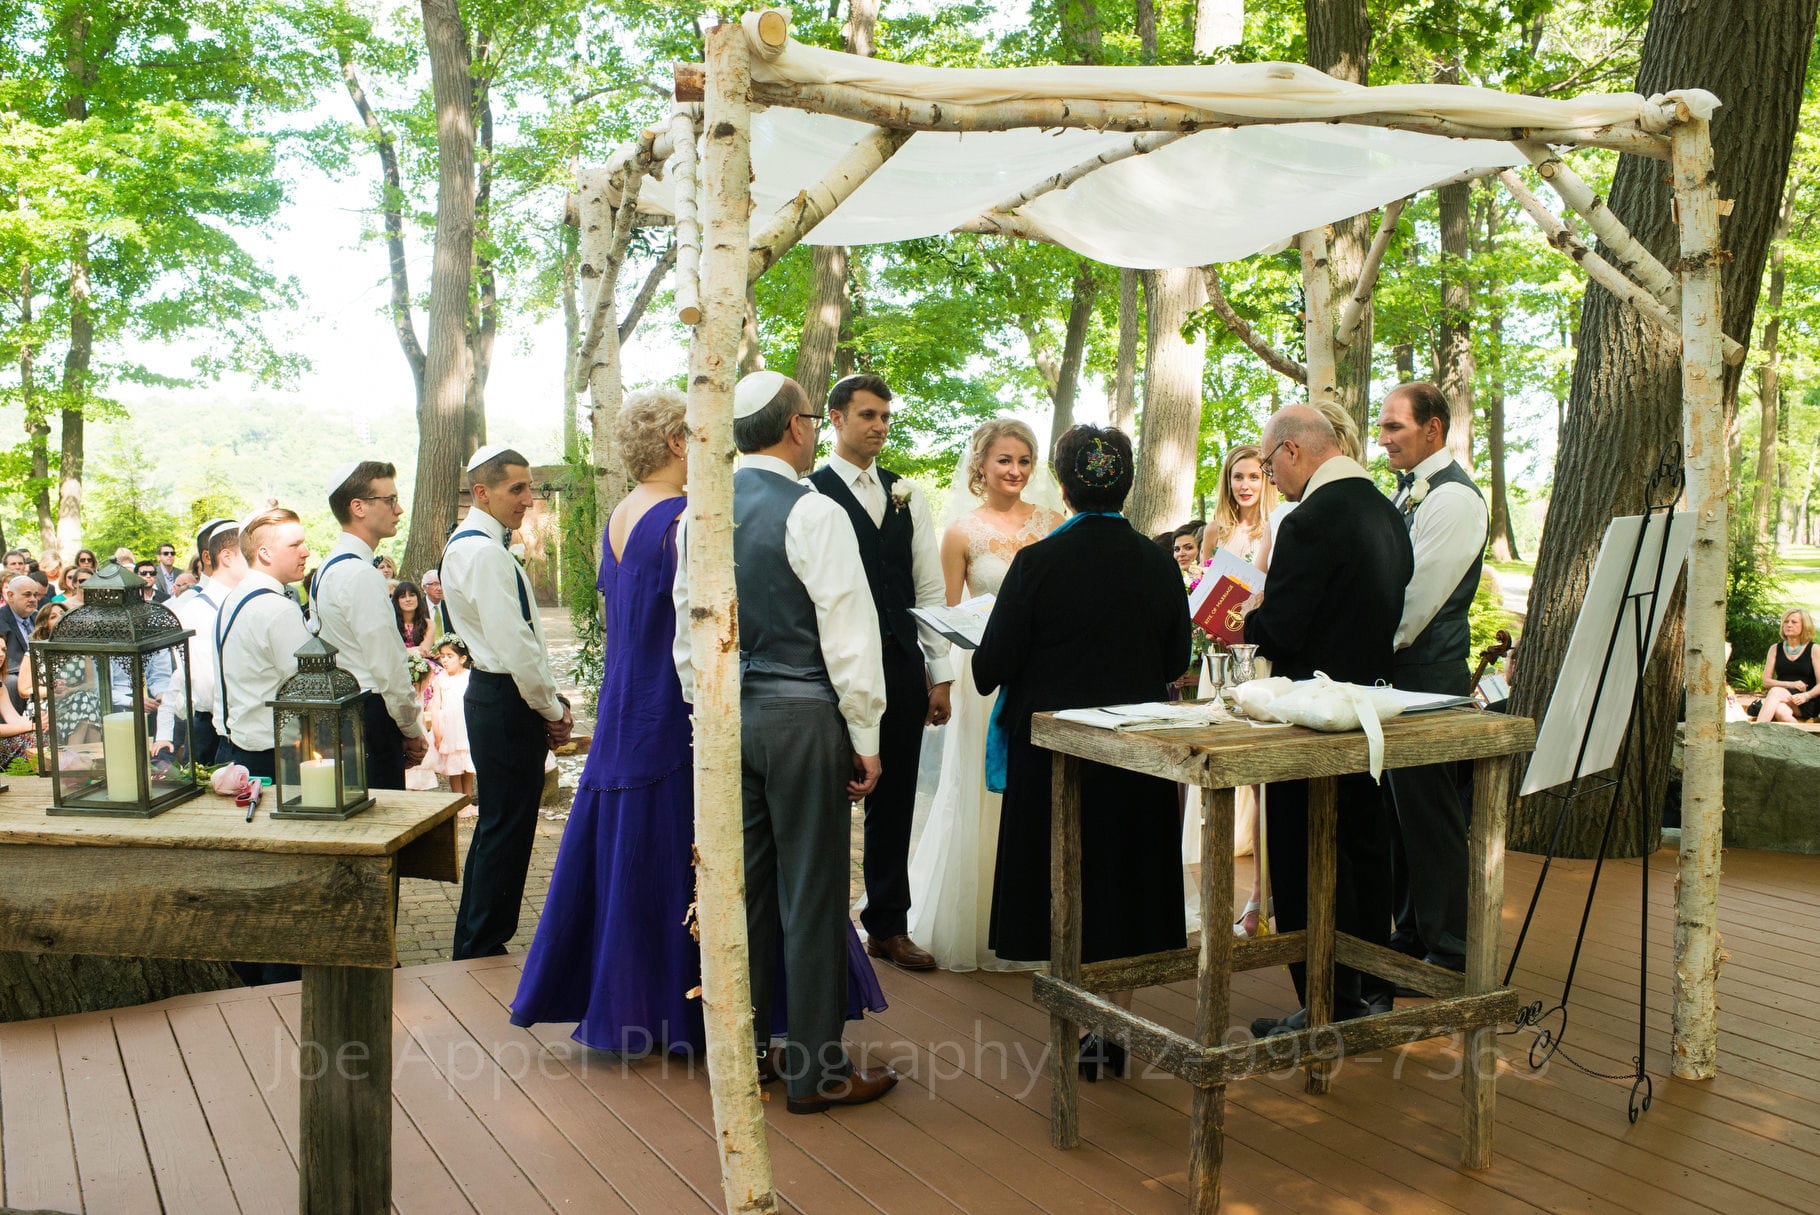 Parents of the couple surround them as they all stand beneath a chuppah set up in a forest grove for an outdoor wedding ceremony.